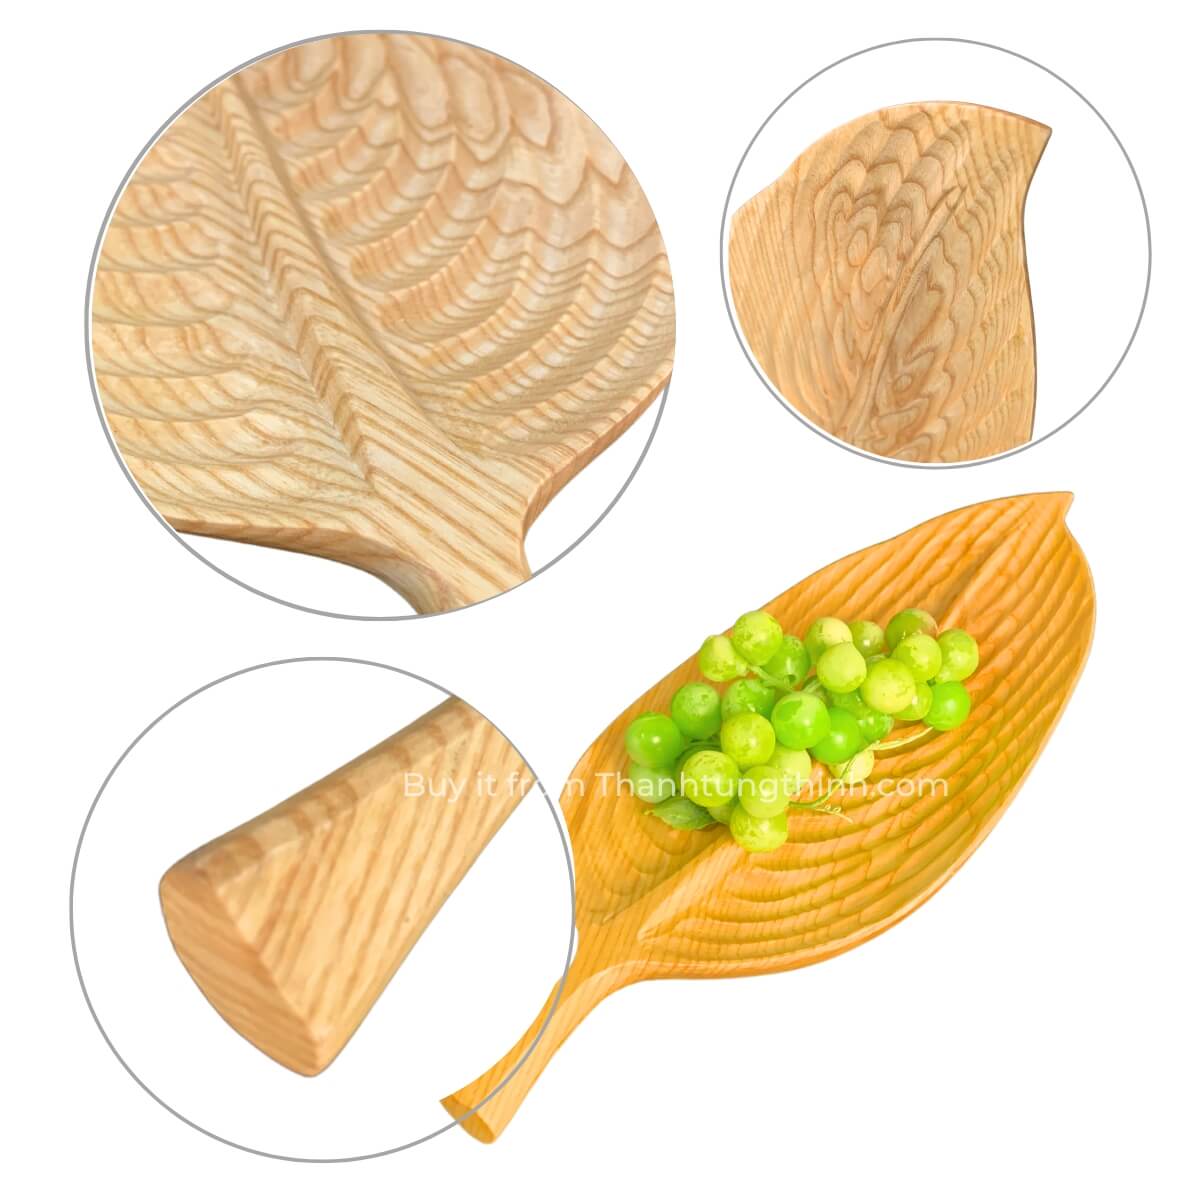 Unique wooden tray in the shape of a long leaf, perfect for convenient food storage